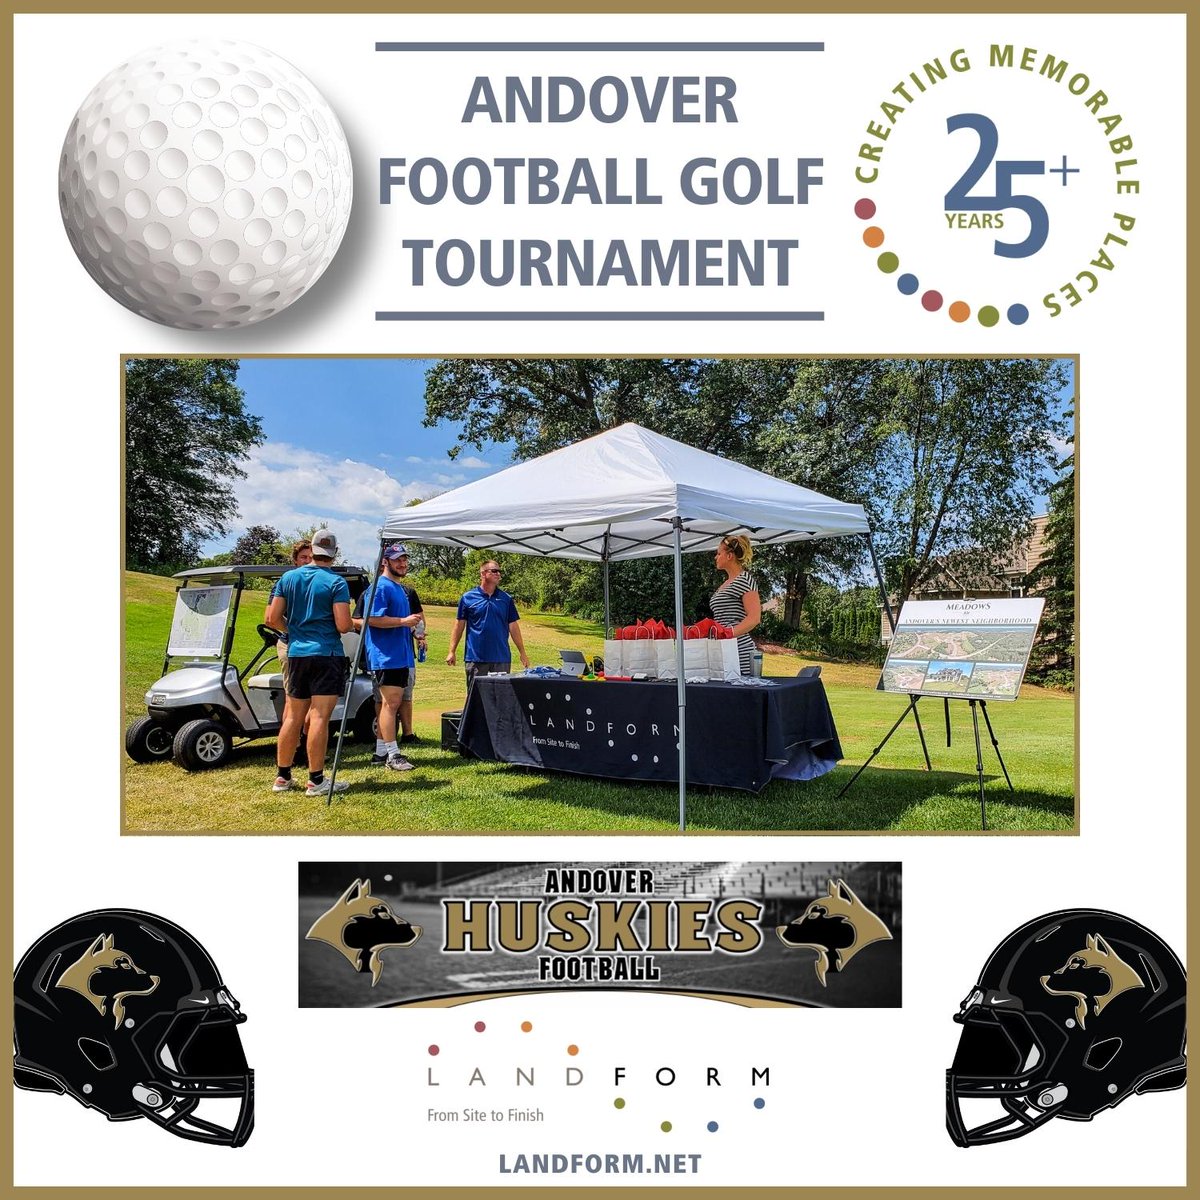 .@AndoverHuskies We are honored to have sponsored this year's #AndoverHuskies Golf Tournament. Incredible Minnesota weather and a collection of amazing players made for a great day. Now we're looking forward to 2023's #golftournament!

#AndoverFootball #LifeAtLandform https://t.co/zG57lxlHOi